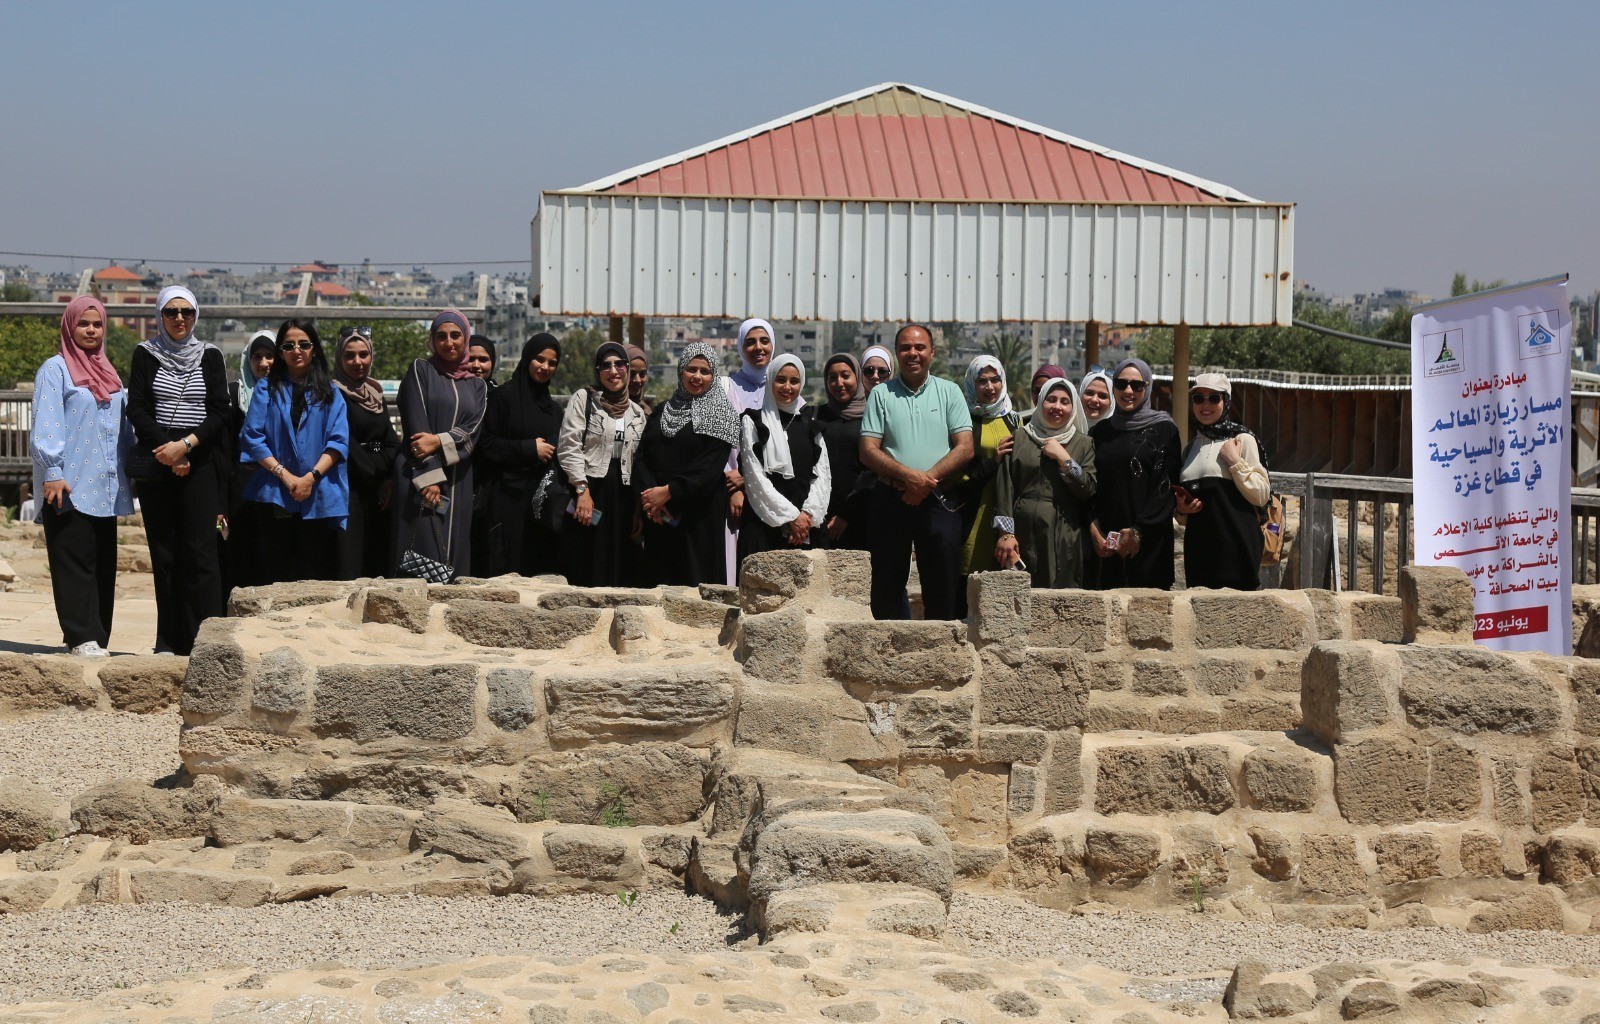 "The Route of Visiting Archaeological and Touristic Monuments in the Gaza Strip"